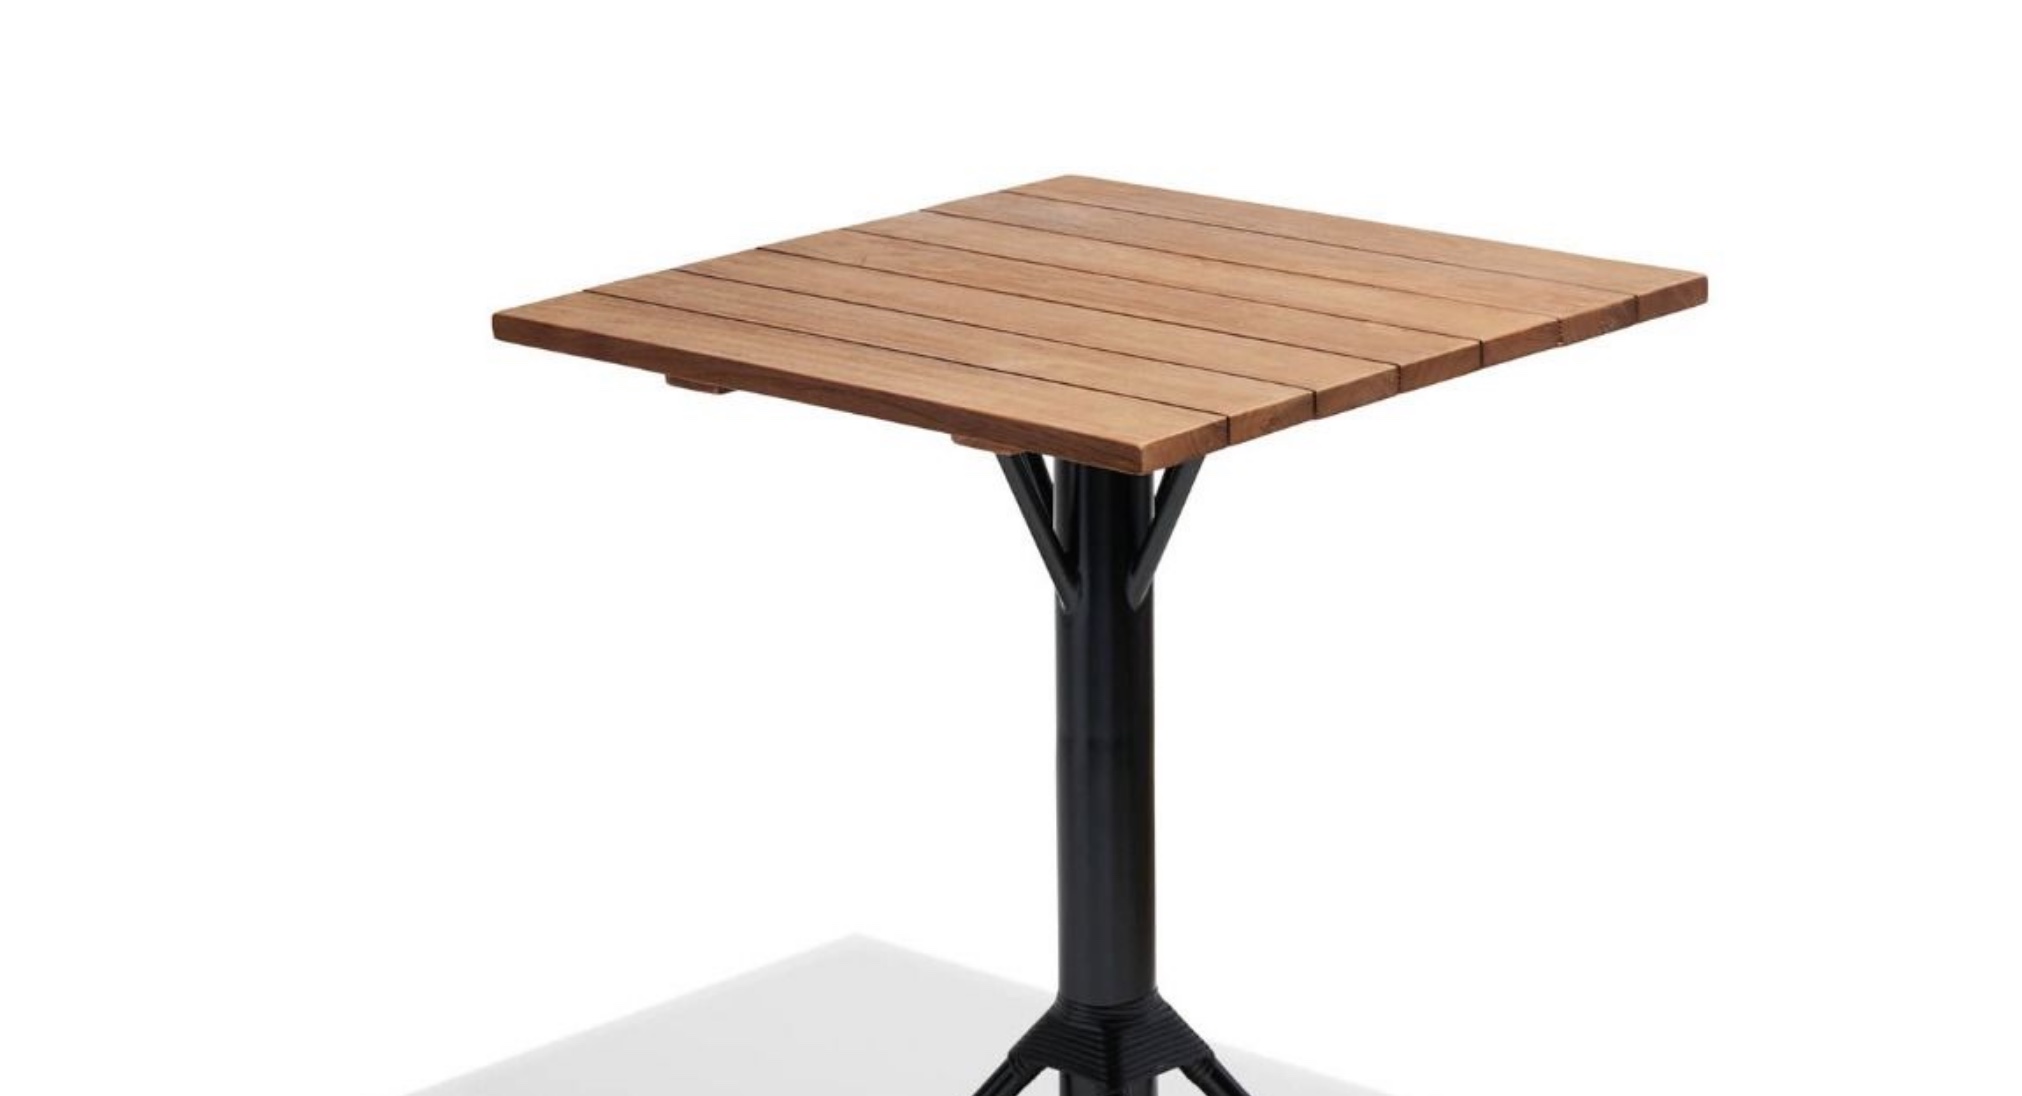 Monaco Collection by Industry West Table Wood Top black painted steel base